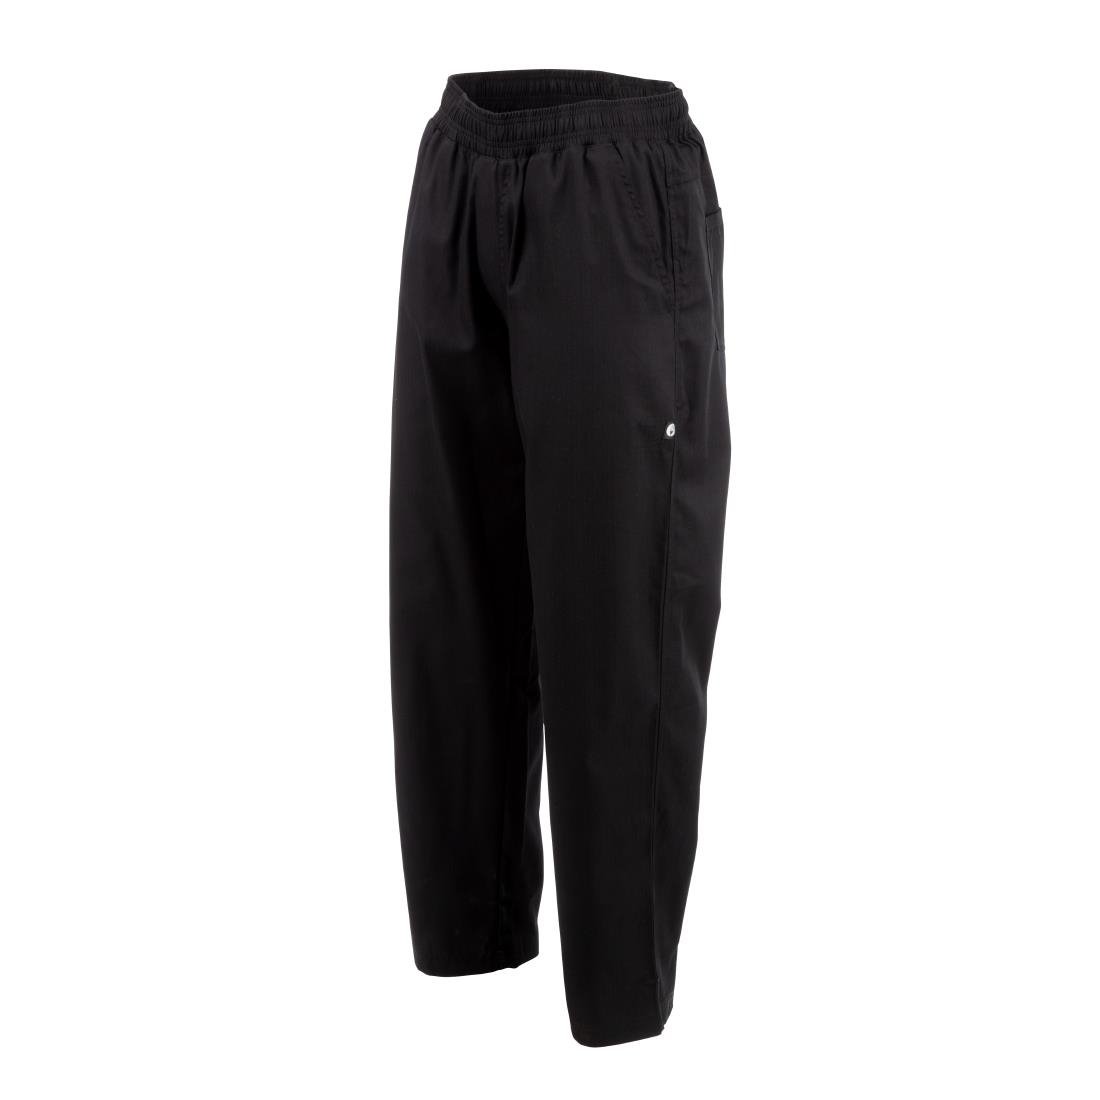 A695-S Chef Works Unisex Better Built Baggy Chefs Trousers Black S